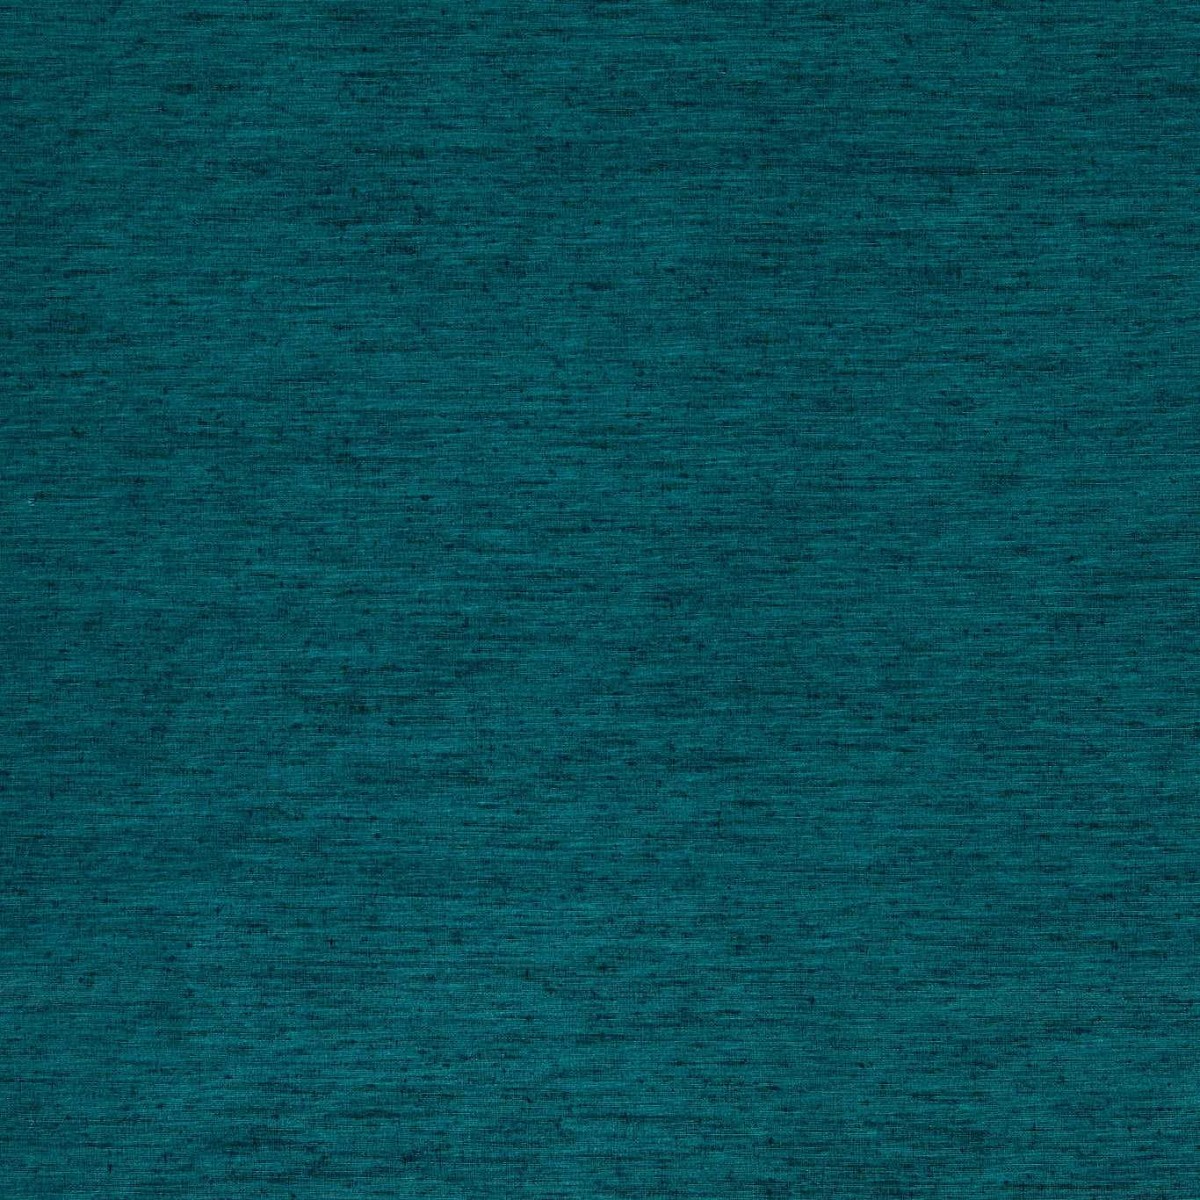 Ravello Teal Fabric by Studio G